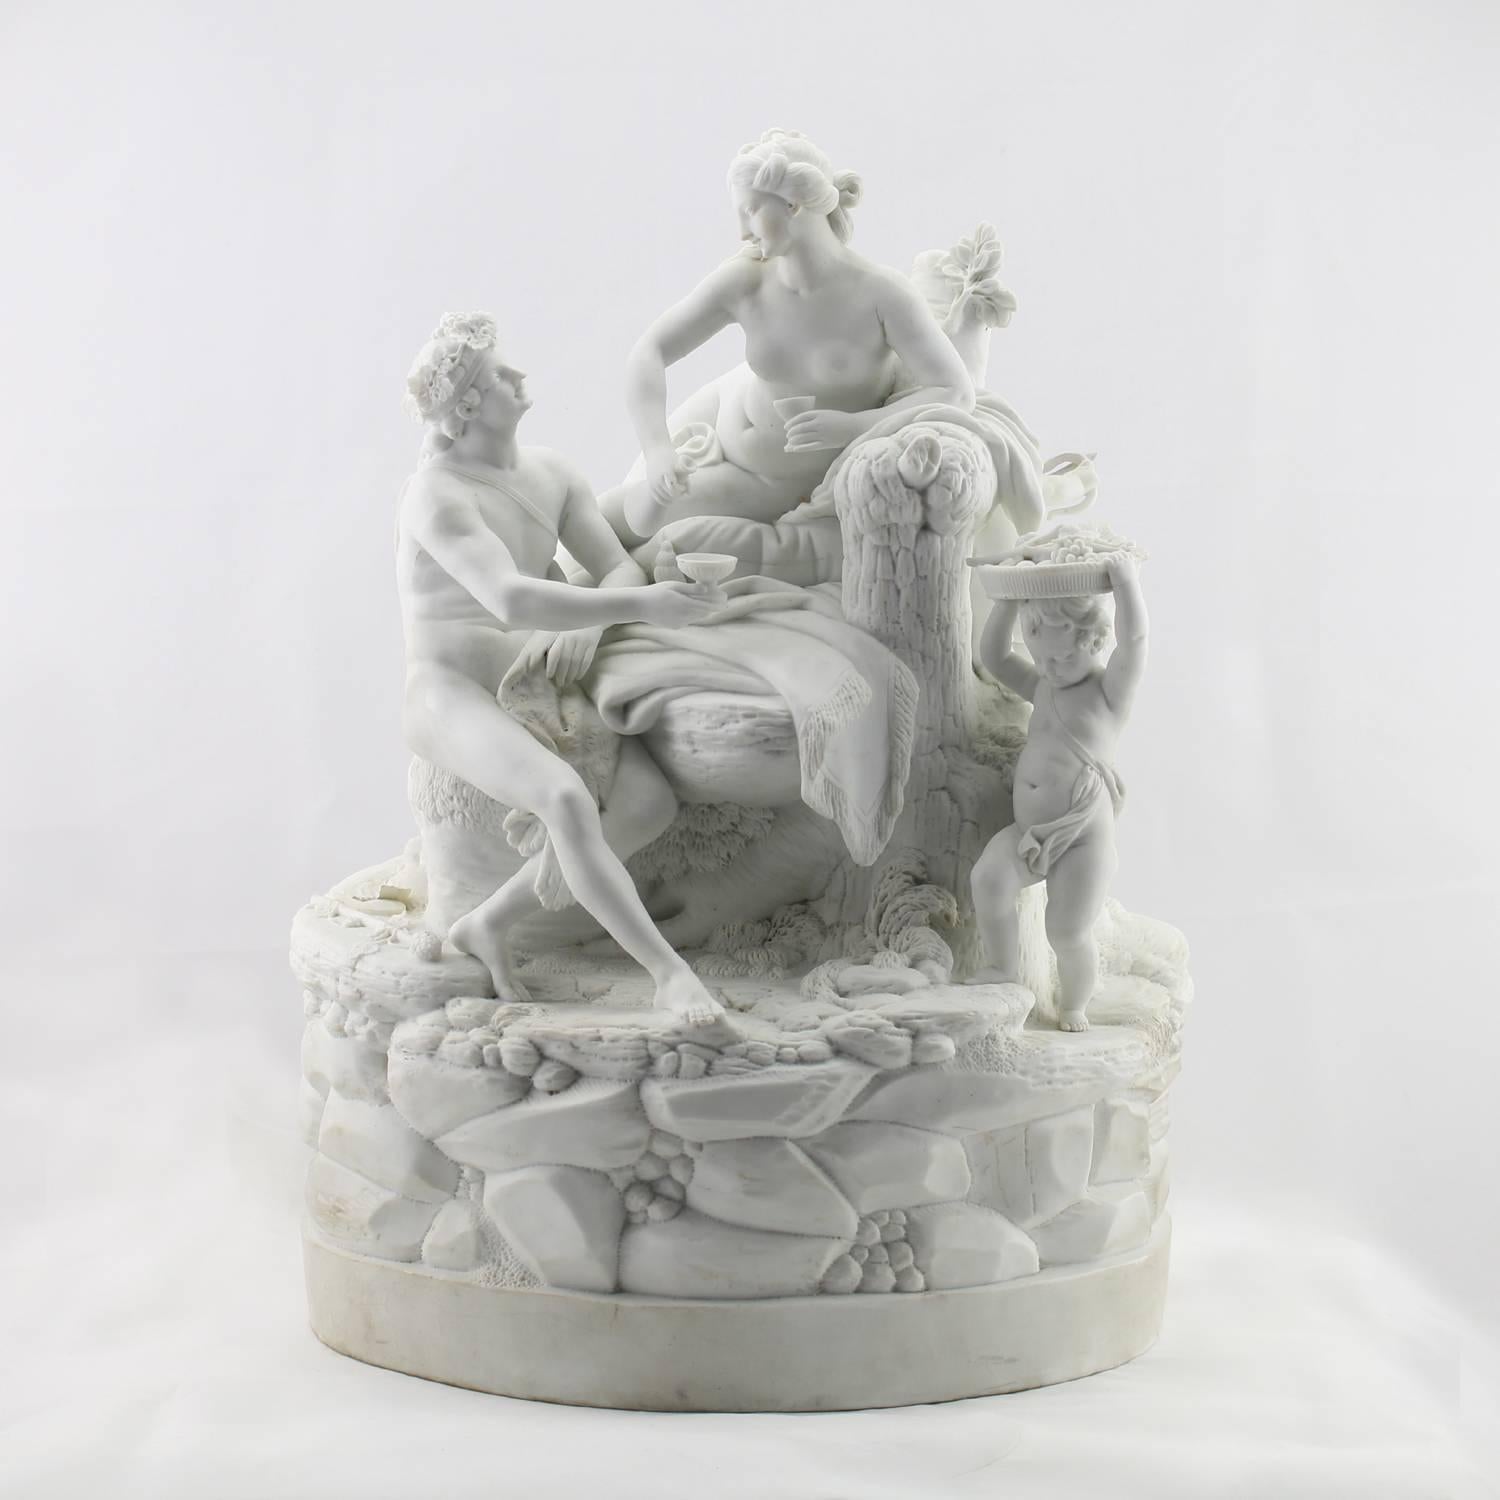 Niderviller White Bisque Porcelain Figure Group - Sculpture by Unknown